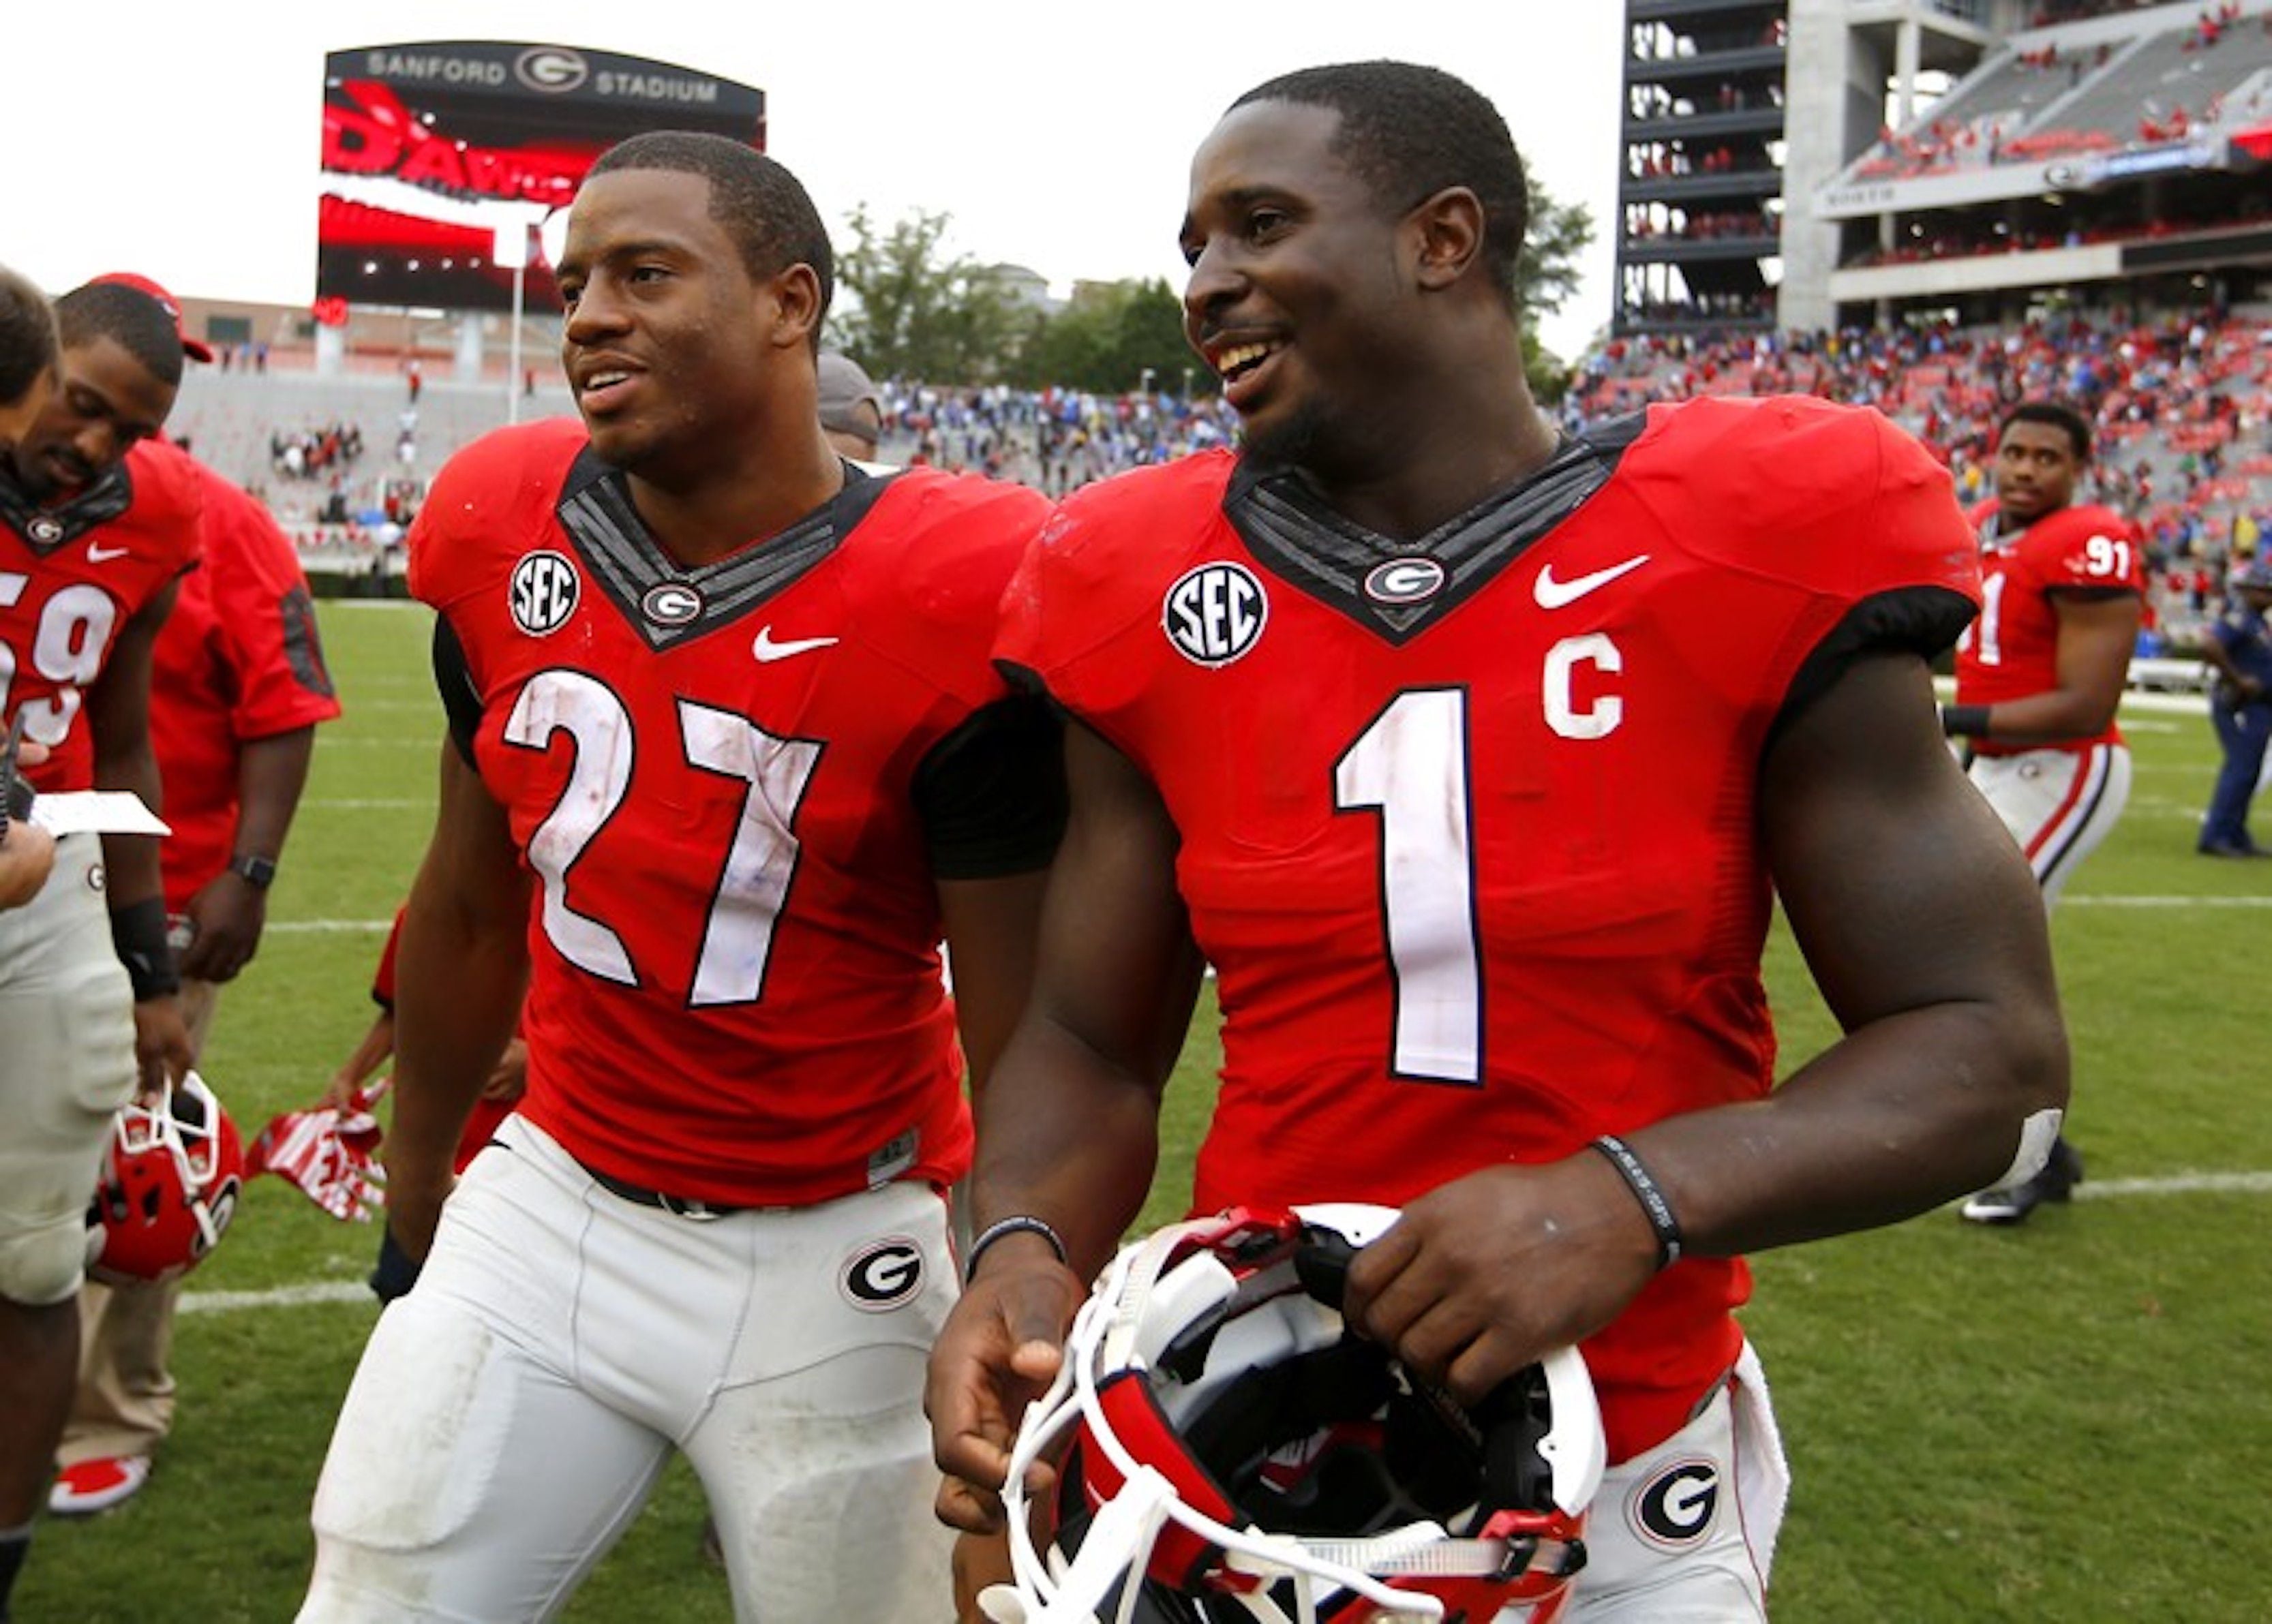 Todd Gurley says UGA is RBU and he's right